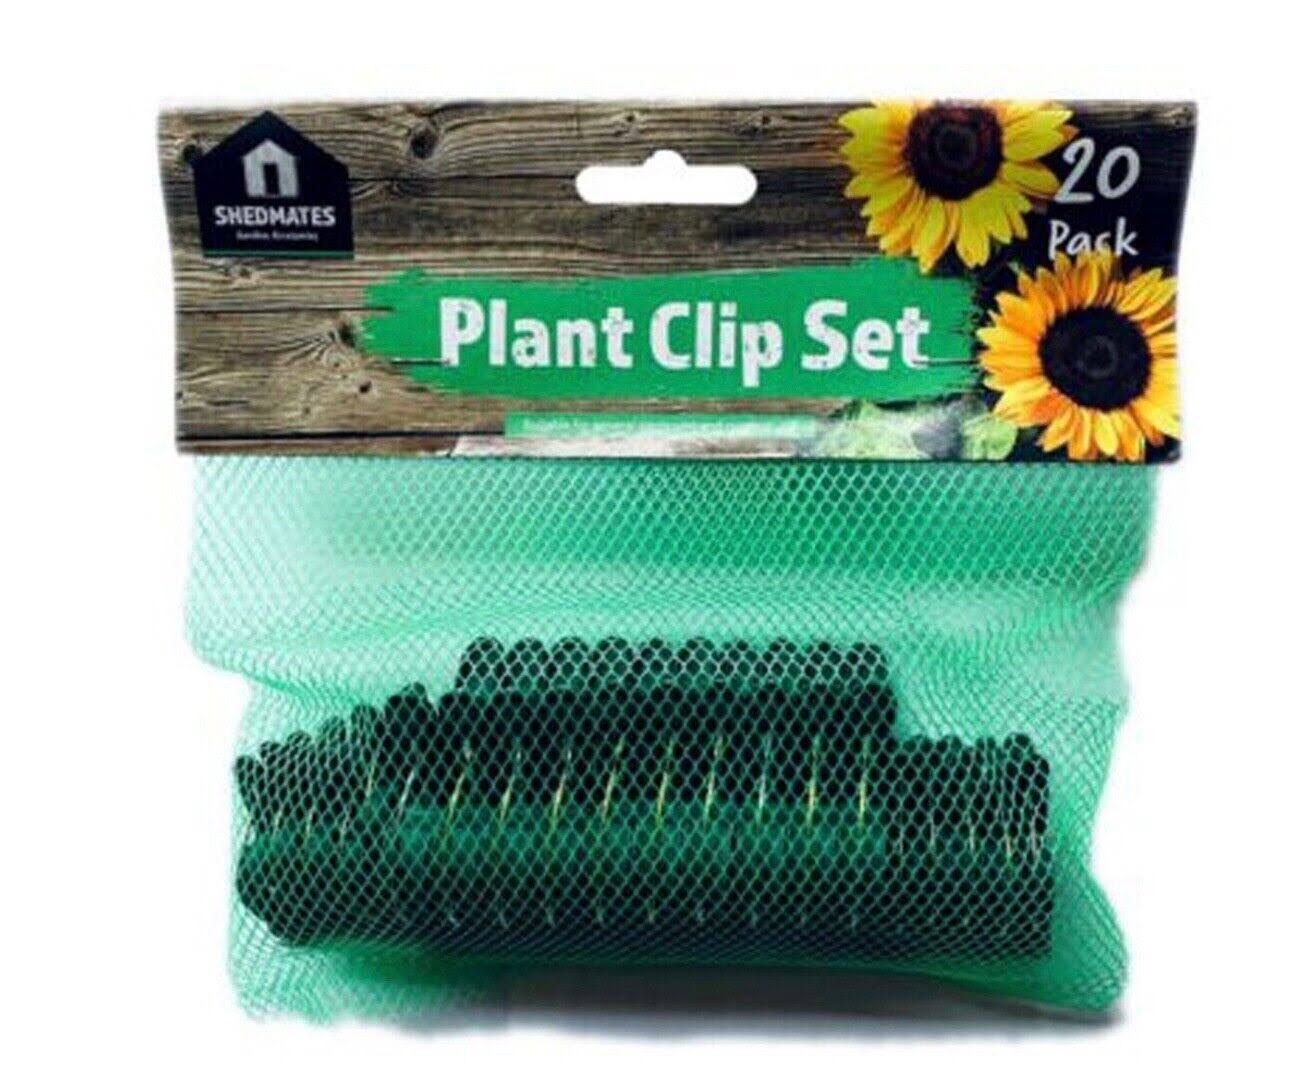 Kingfisher Garden Plant Clips 20 Pack